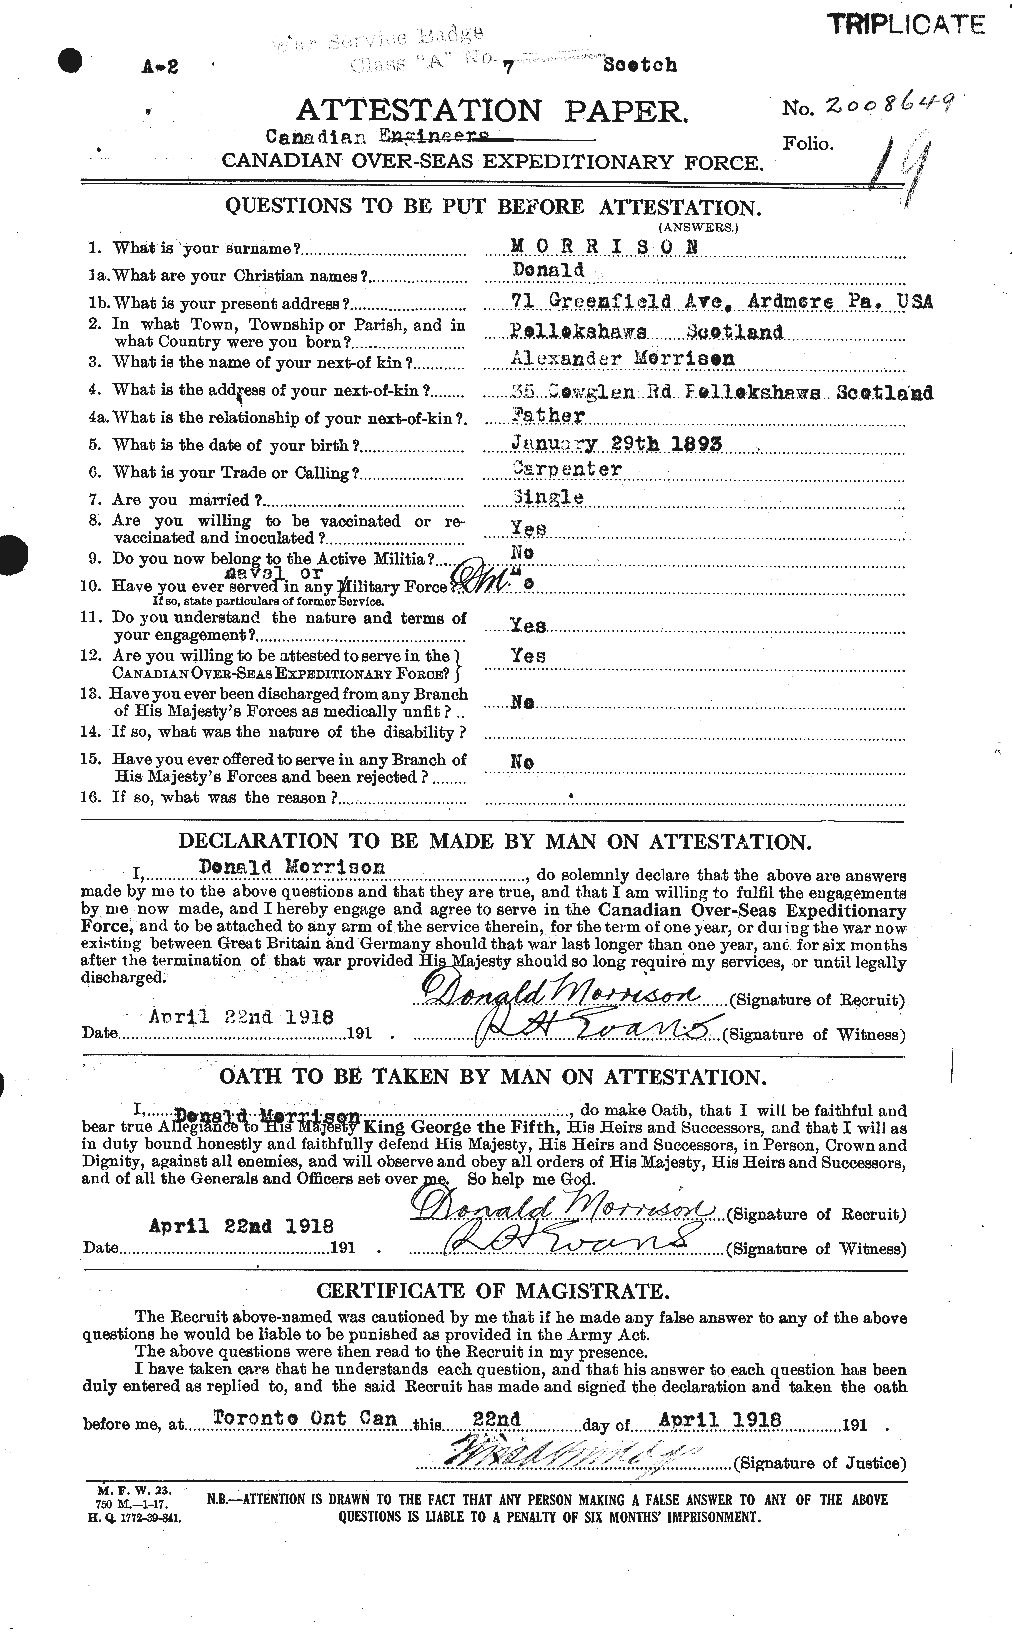 Personnel Records of the First World War - CEF 505433a